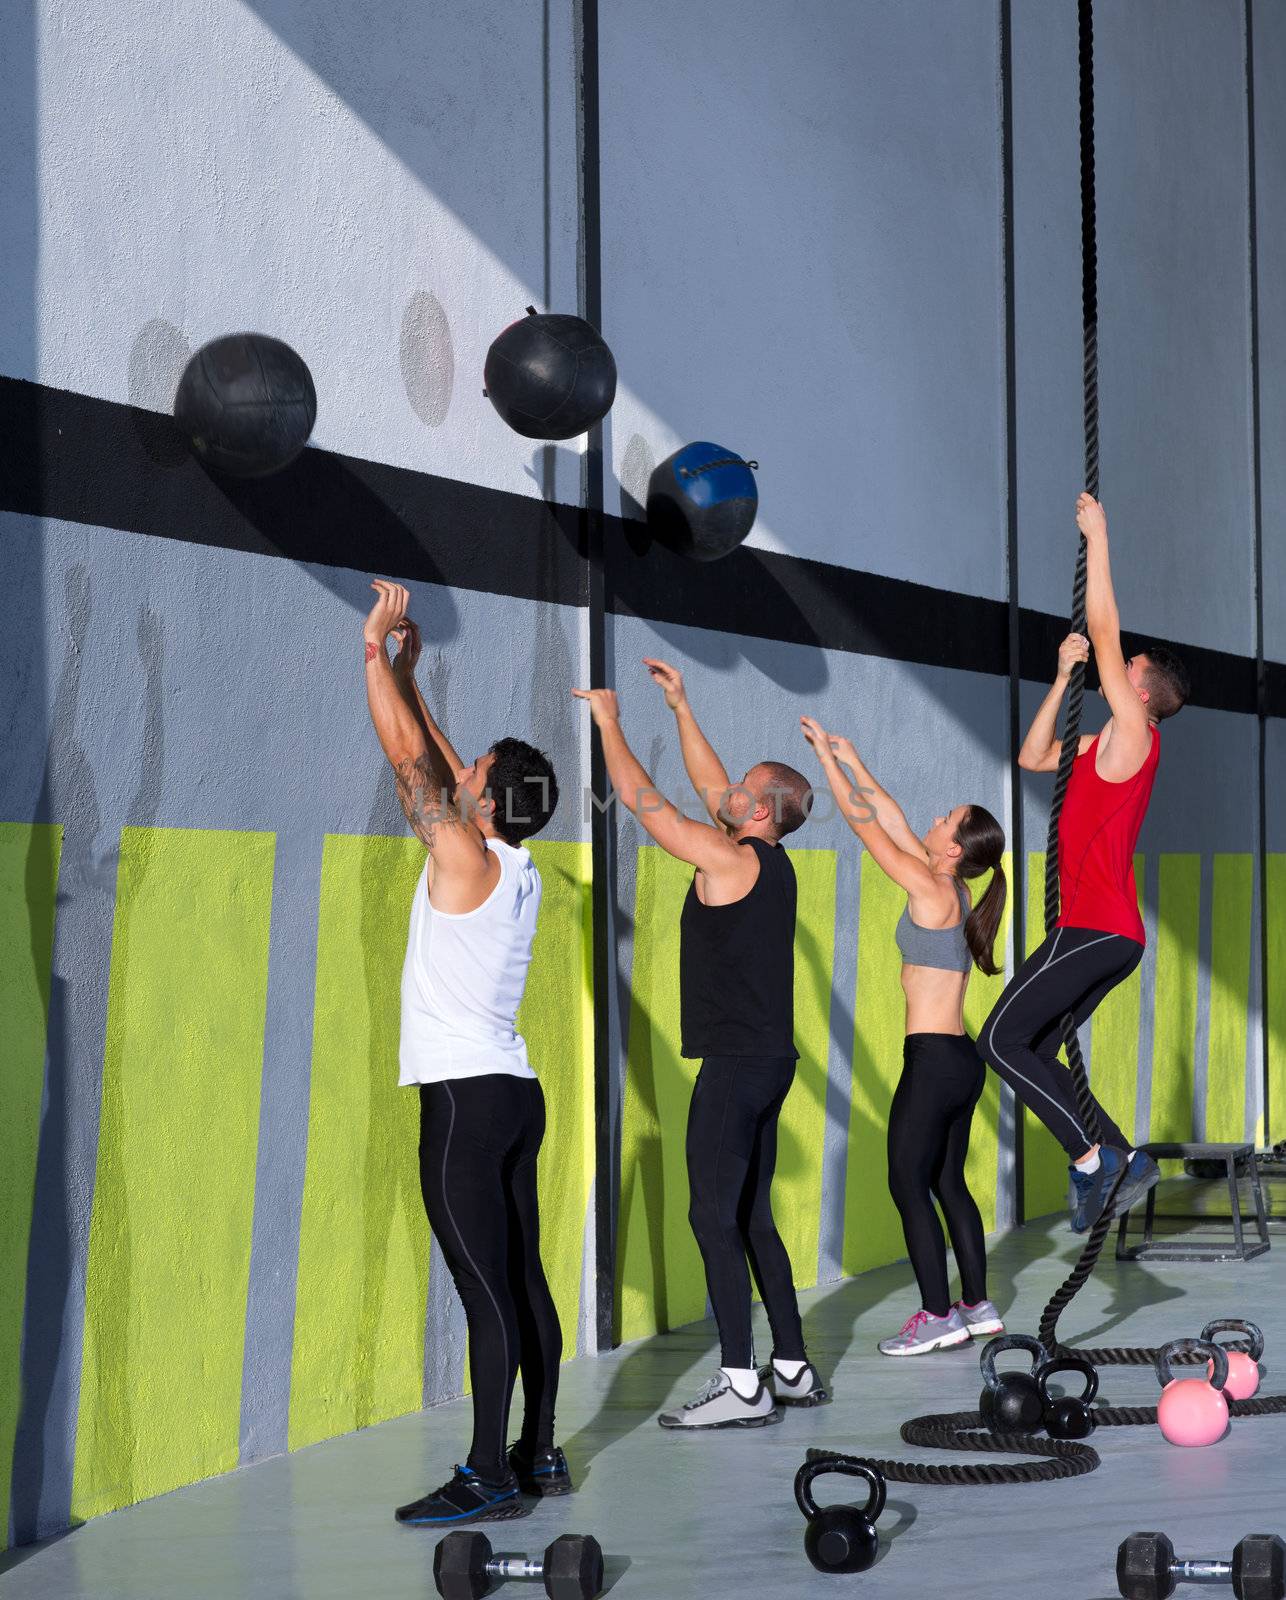 Crossfit workout people group with wall balls and rope at fitness gym